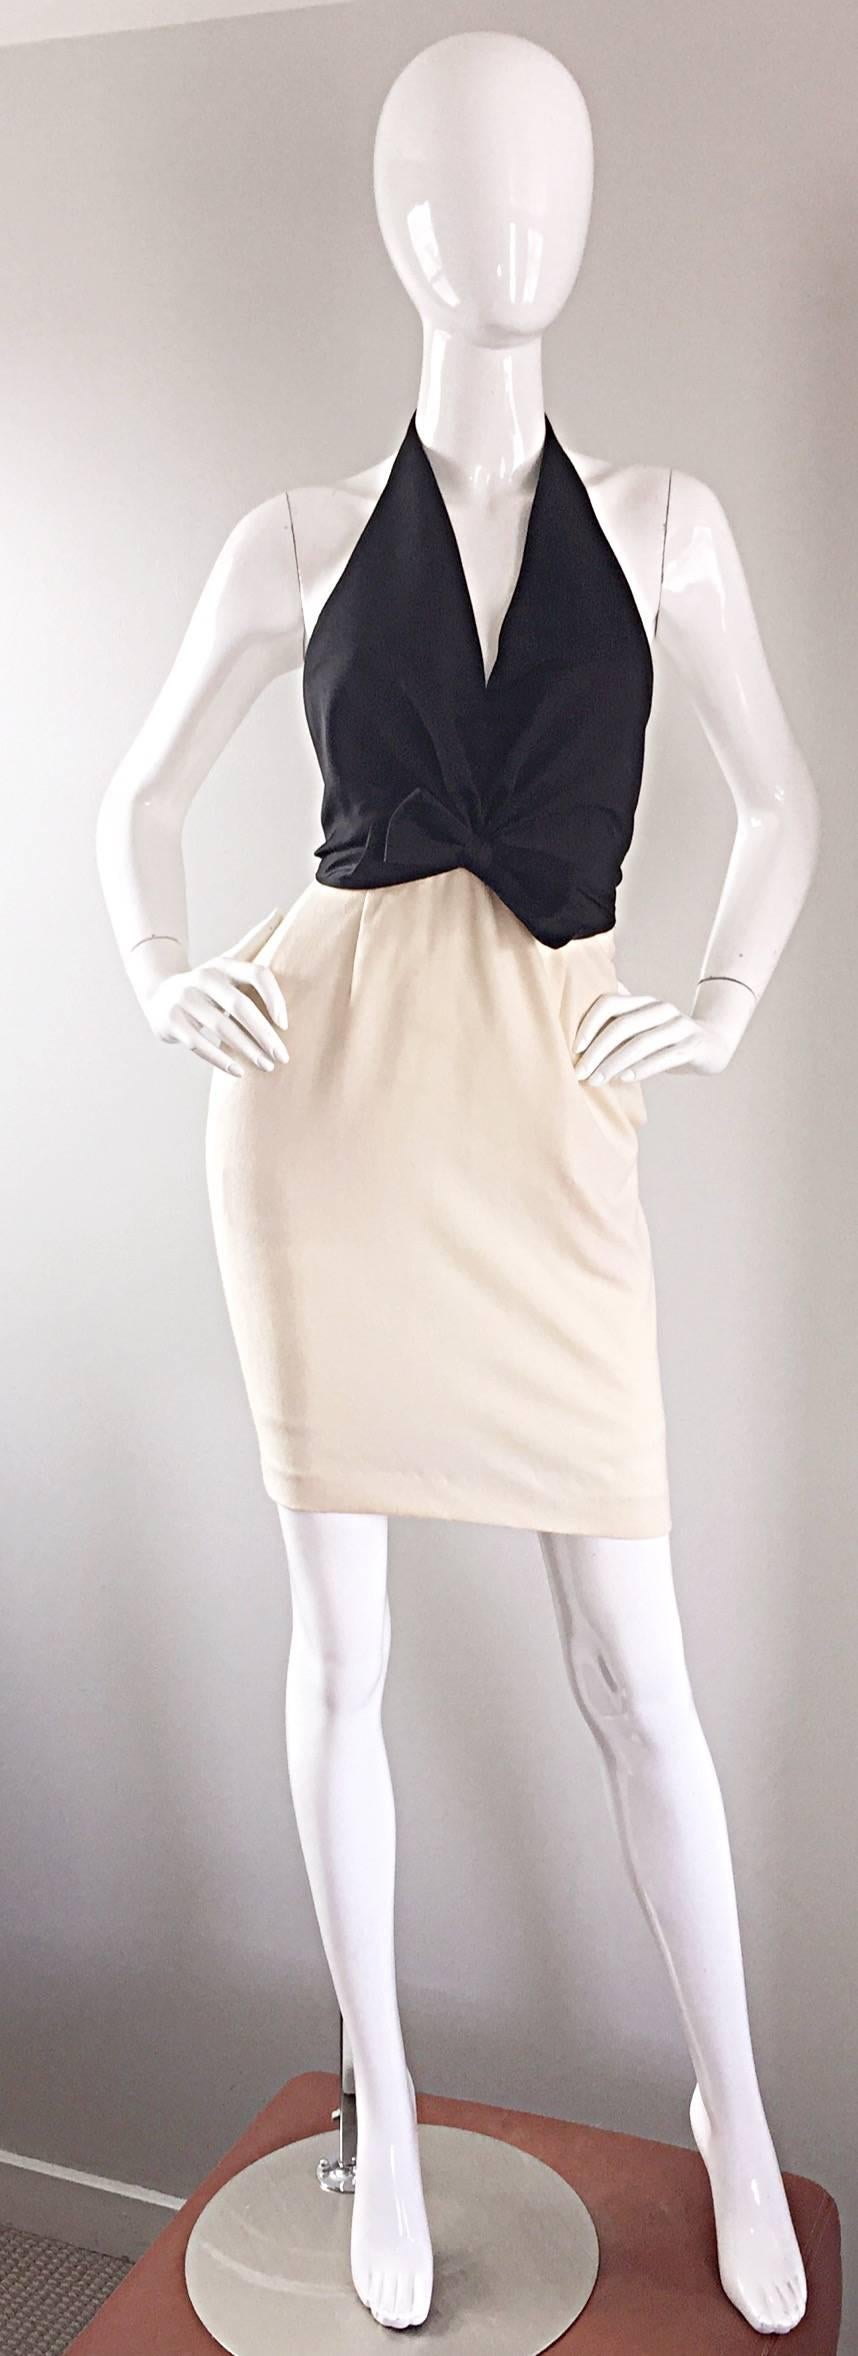 Sexy vintage 1990s / 90s BILL BLASS black and ivory halter dress! Flattering black silk halter top with an asymmetrical bow at the waist. Lightweight ivory wool skirt. I cannot even begin to describe how amazing this dress is in person, and on! Open